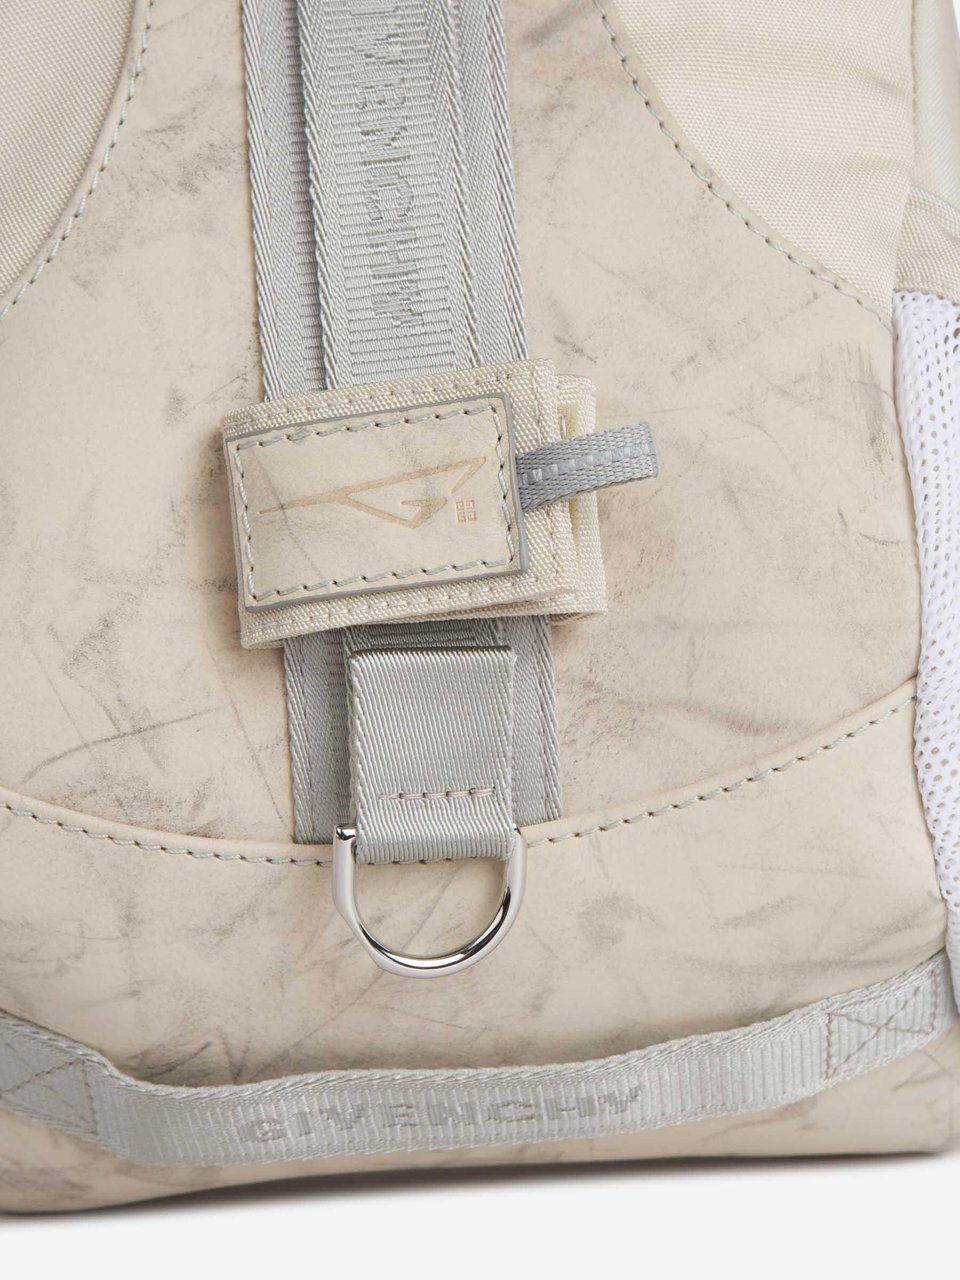 Givenchy G-Trail S Backpack Divers